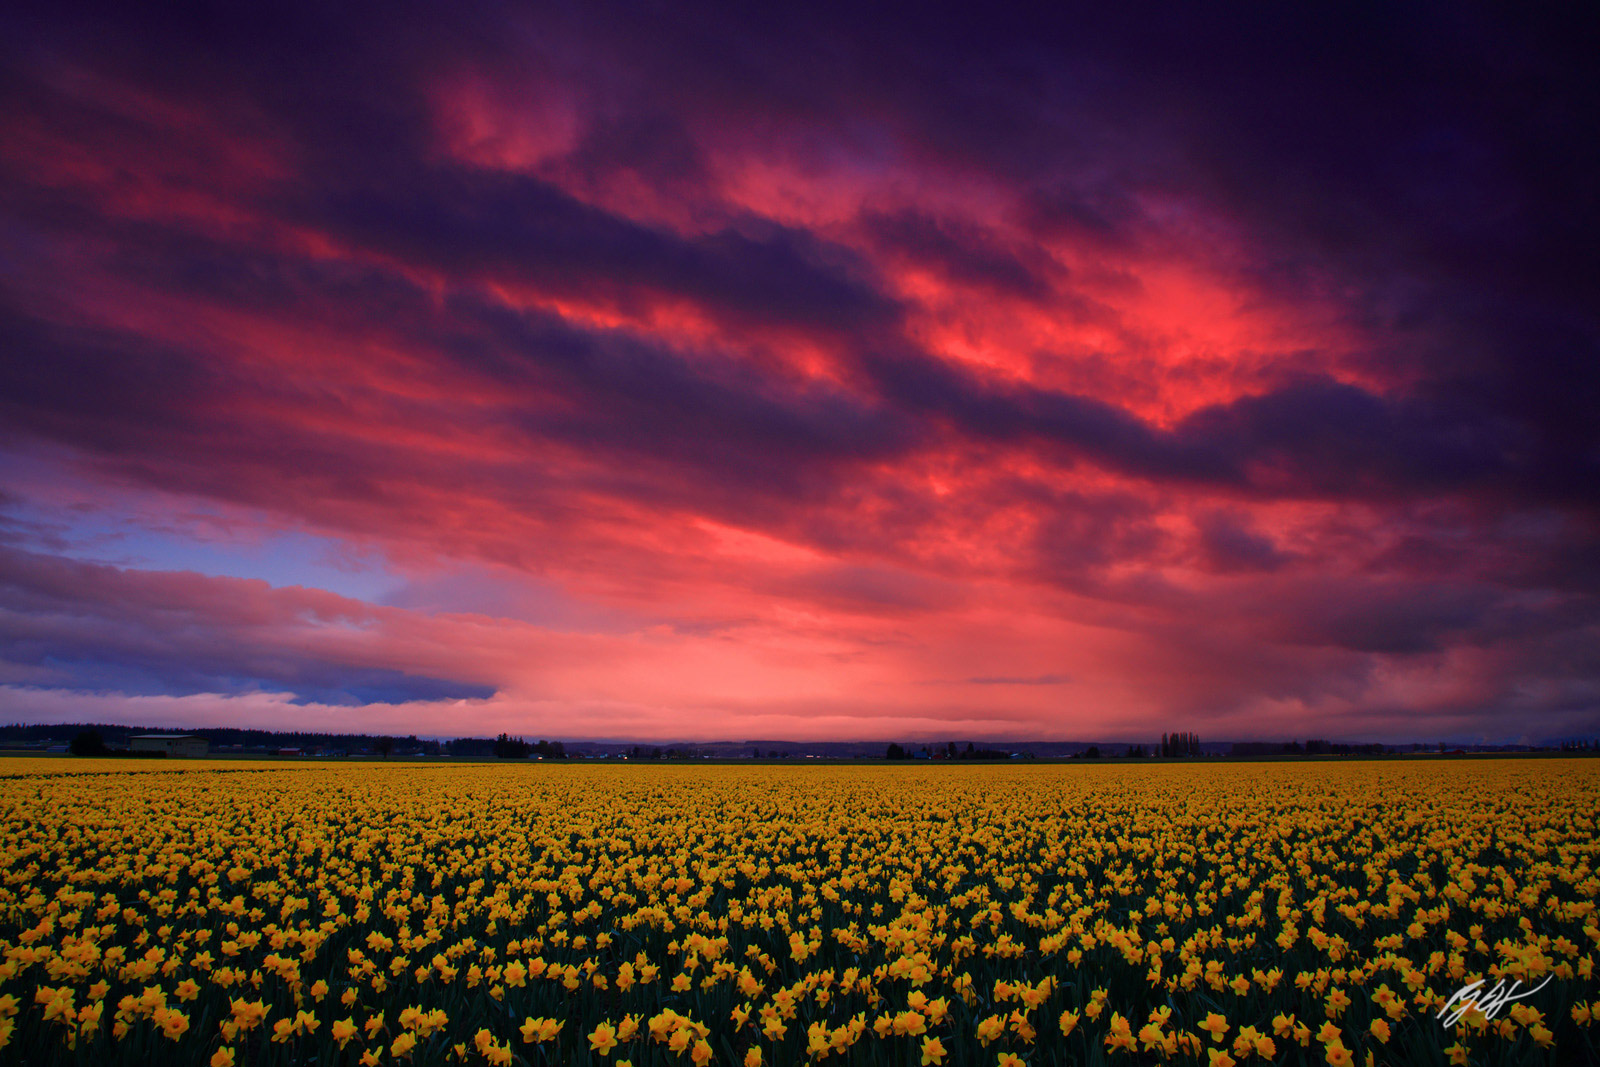 Storm Clouds Light up at Sunrise over the Daffodil Fields of Skagit Valley in Washington